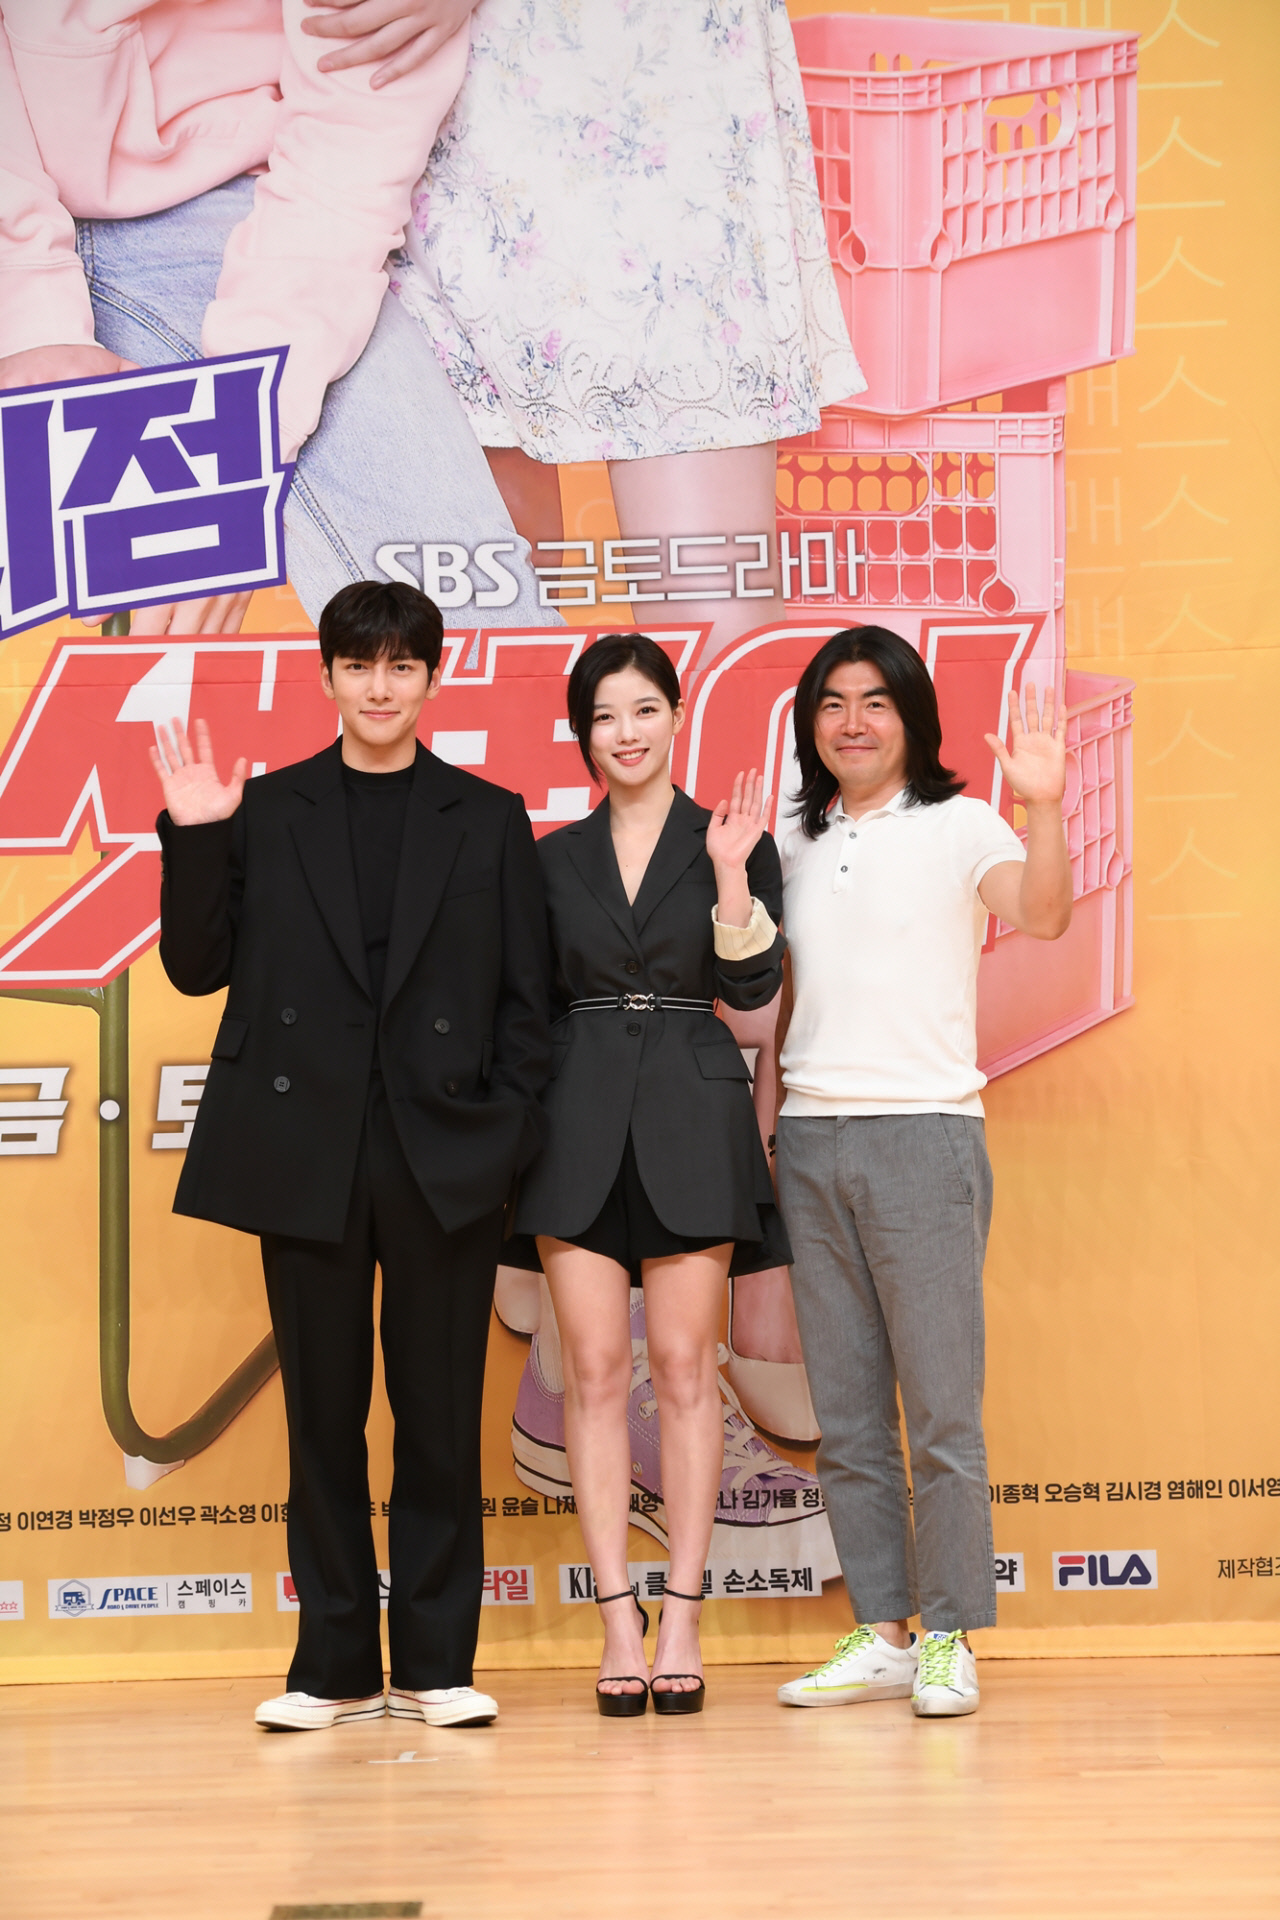 Comic romance comes when Actor Ji Chang-wook and Kim Yoo-jung meet.The SBS new gilt play Convenience store Morning Star, which will be broadcasted at 10 p.m. on the 19th, is a 24-hour unpredictable comic romance drama in which four-dimensional alba students and a full-fledged manager, Hunnam, will perform the Convenience store on stage.The Rocco artisan Ji Chang-wook and Kim Yoo-jung met and are expecting a great deal with Lee Myung-woos new work, which was loved by Drama Fever Blood Priest last year.In an online production presentation of Convenience Store Morning Star, Lee said, I am glad that I can get a gilt play that can be called SBSs sign time after the heated priest.There is a sense of pressure at the same time. There will be expectations for the comic sense of the previous work The Fever Priest, but our drama is a work that combines romance and comic.I, the staff, and the actors are trying to make a light and rhythmic drama according to it.  I think it is a warm-hearted family comedy that is a little different from heat-blooded priest.As the time of the gold-earth time zone is competing with other channel entertainment programs, we are trying to make a professional that is as fun as entertainment and more impressive than entertainment in the field. Ji Chang-wook and Kim Yoo-jung, who met for the first time through this work, predicted a different charm with a close chemistry.Ji Chang-wook said, Each person is a person who covers a lot of faces.I was worried about how I would be close to each other while working in the future because I could not talk much at the first meeting. But I became naturally friendly while shooting, and Kim Yoo-jung said, Thank you for giving me a lot of consideration in the field. Ji Chang-wook challenges comic act through Choi Dae-hyun, the manager of Shinseong-dong Convenience store.The big fans are afraid of being destroyed, but Ji Chang-wook is clearly trying to go more at the point where it has to be broken, Lee said. We are getting strength and comfort from the position of the director because we have worked hard enough to keep our work in mind after our drama.Kim Yoo-jung, who appears in the Convenience store Albany, presents Action Acting.If female actors are hard to digest their action bodies and the band is filmed, angles or pictures may be limited, Lee said.Kim Yoo-jung has digested almost all the gods without a band.  If you watch the broadcast tonight, you will be able to confirm Kim Yoo-jungs enormous kick. Finally, this PD said, The first word I thought when planning a drama is warmness.I hope that I can feel something while laughing for an hour while watching our drama.  I made a lot of efforts to make the whole family look after the power and positive elements of the original character.It will be a work with laughter and emotional codes that the whole family can enjoy together, he said.